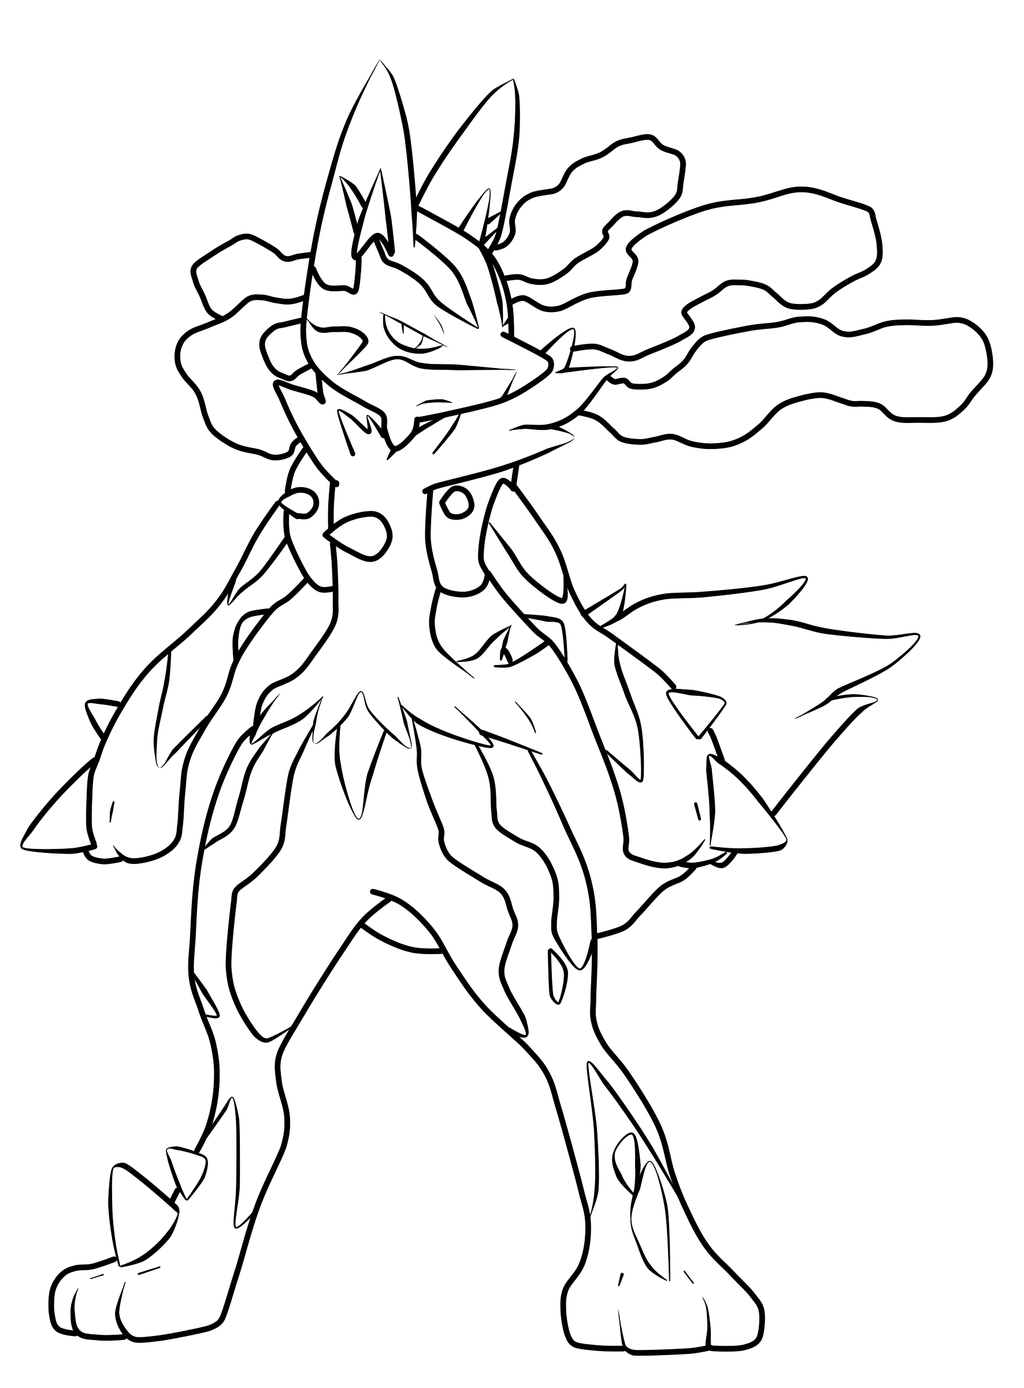 Mega Pokemon Coloring Pages At GetColorings Free Printable 